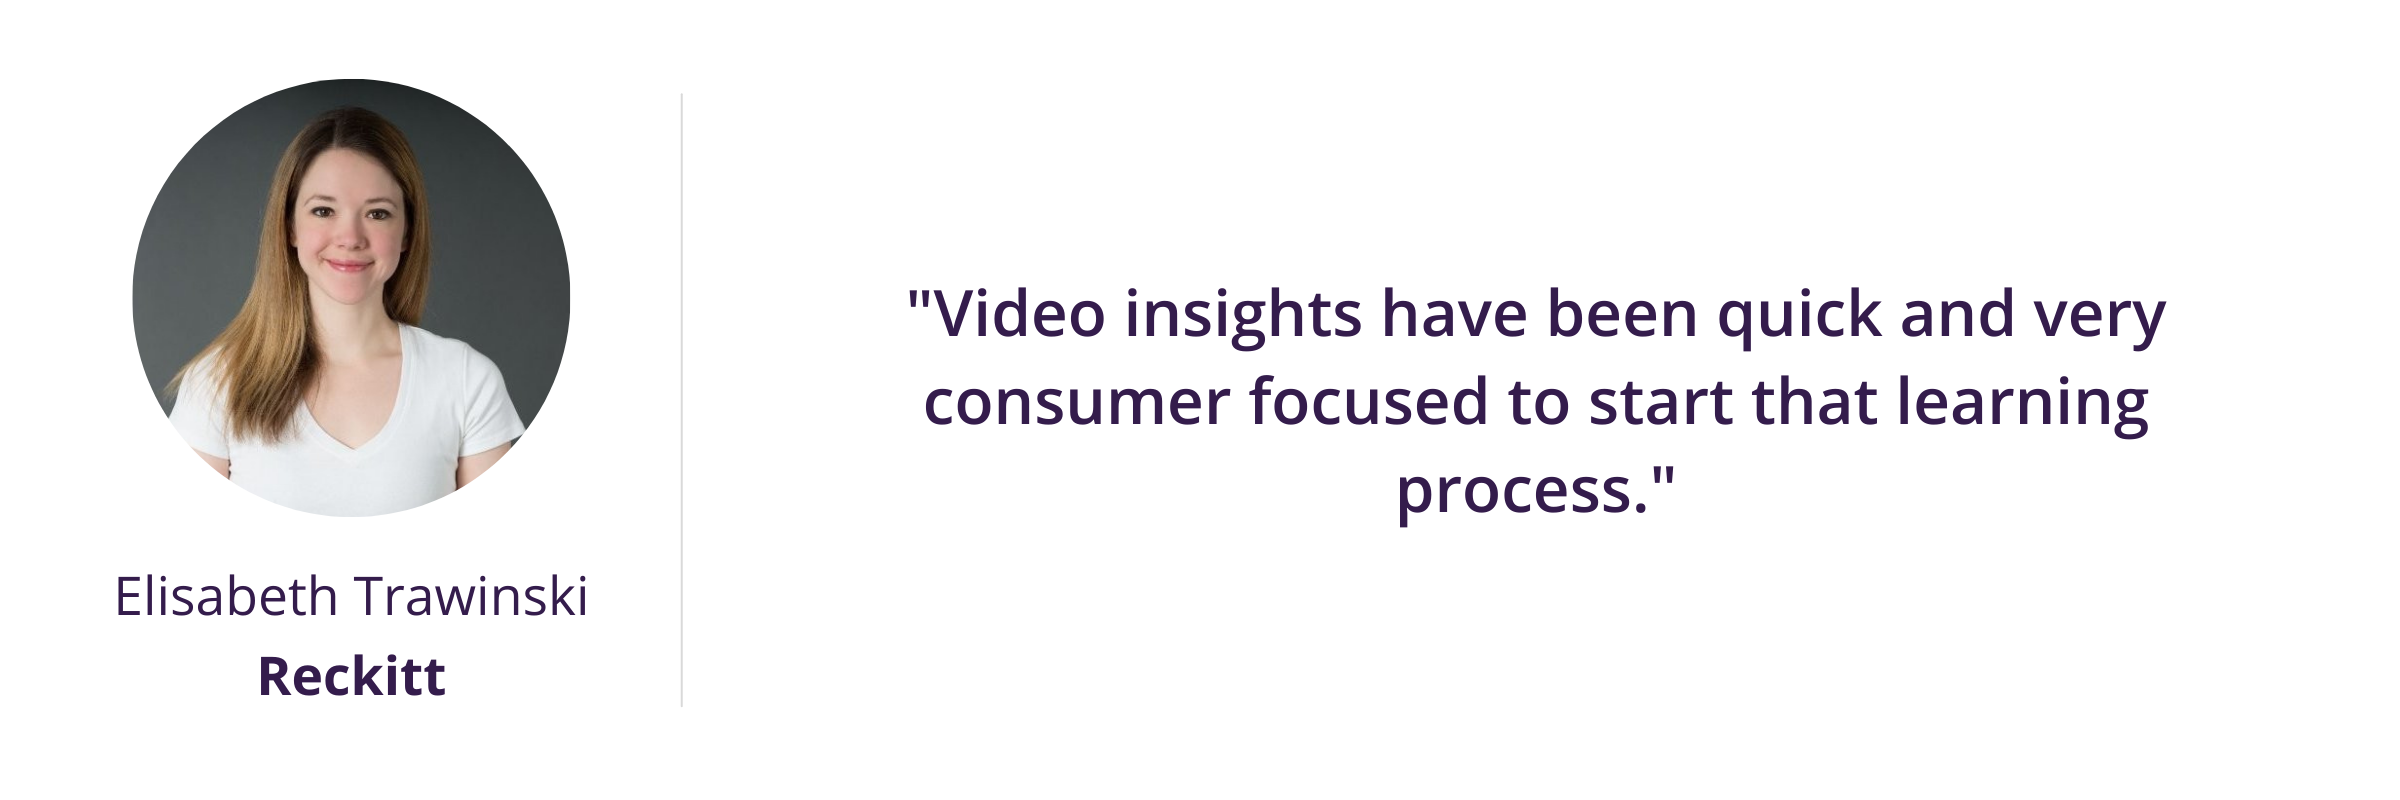 Video insights have been quick and very consumer focused to start that learning process.